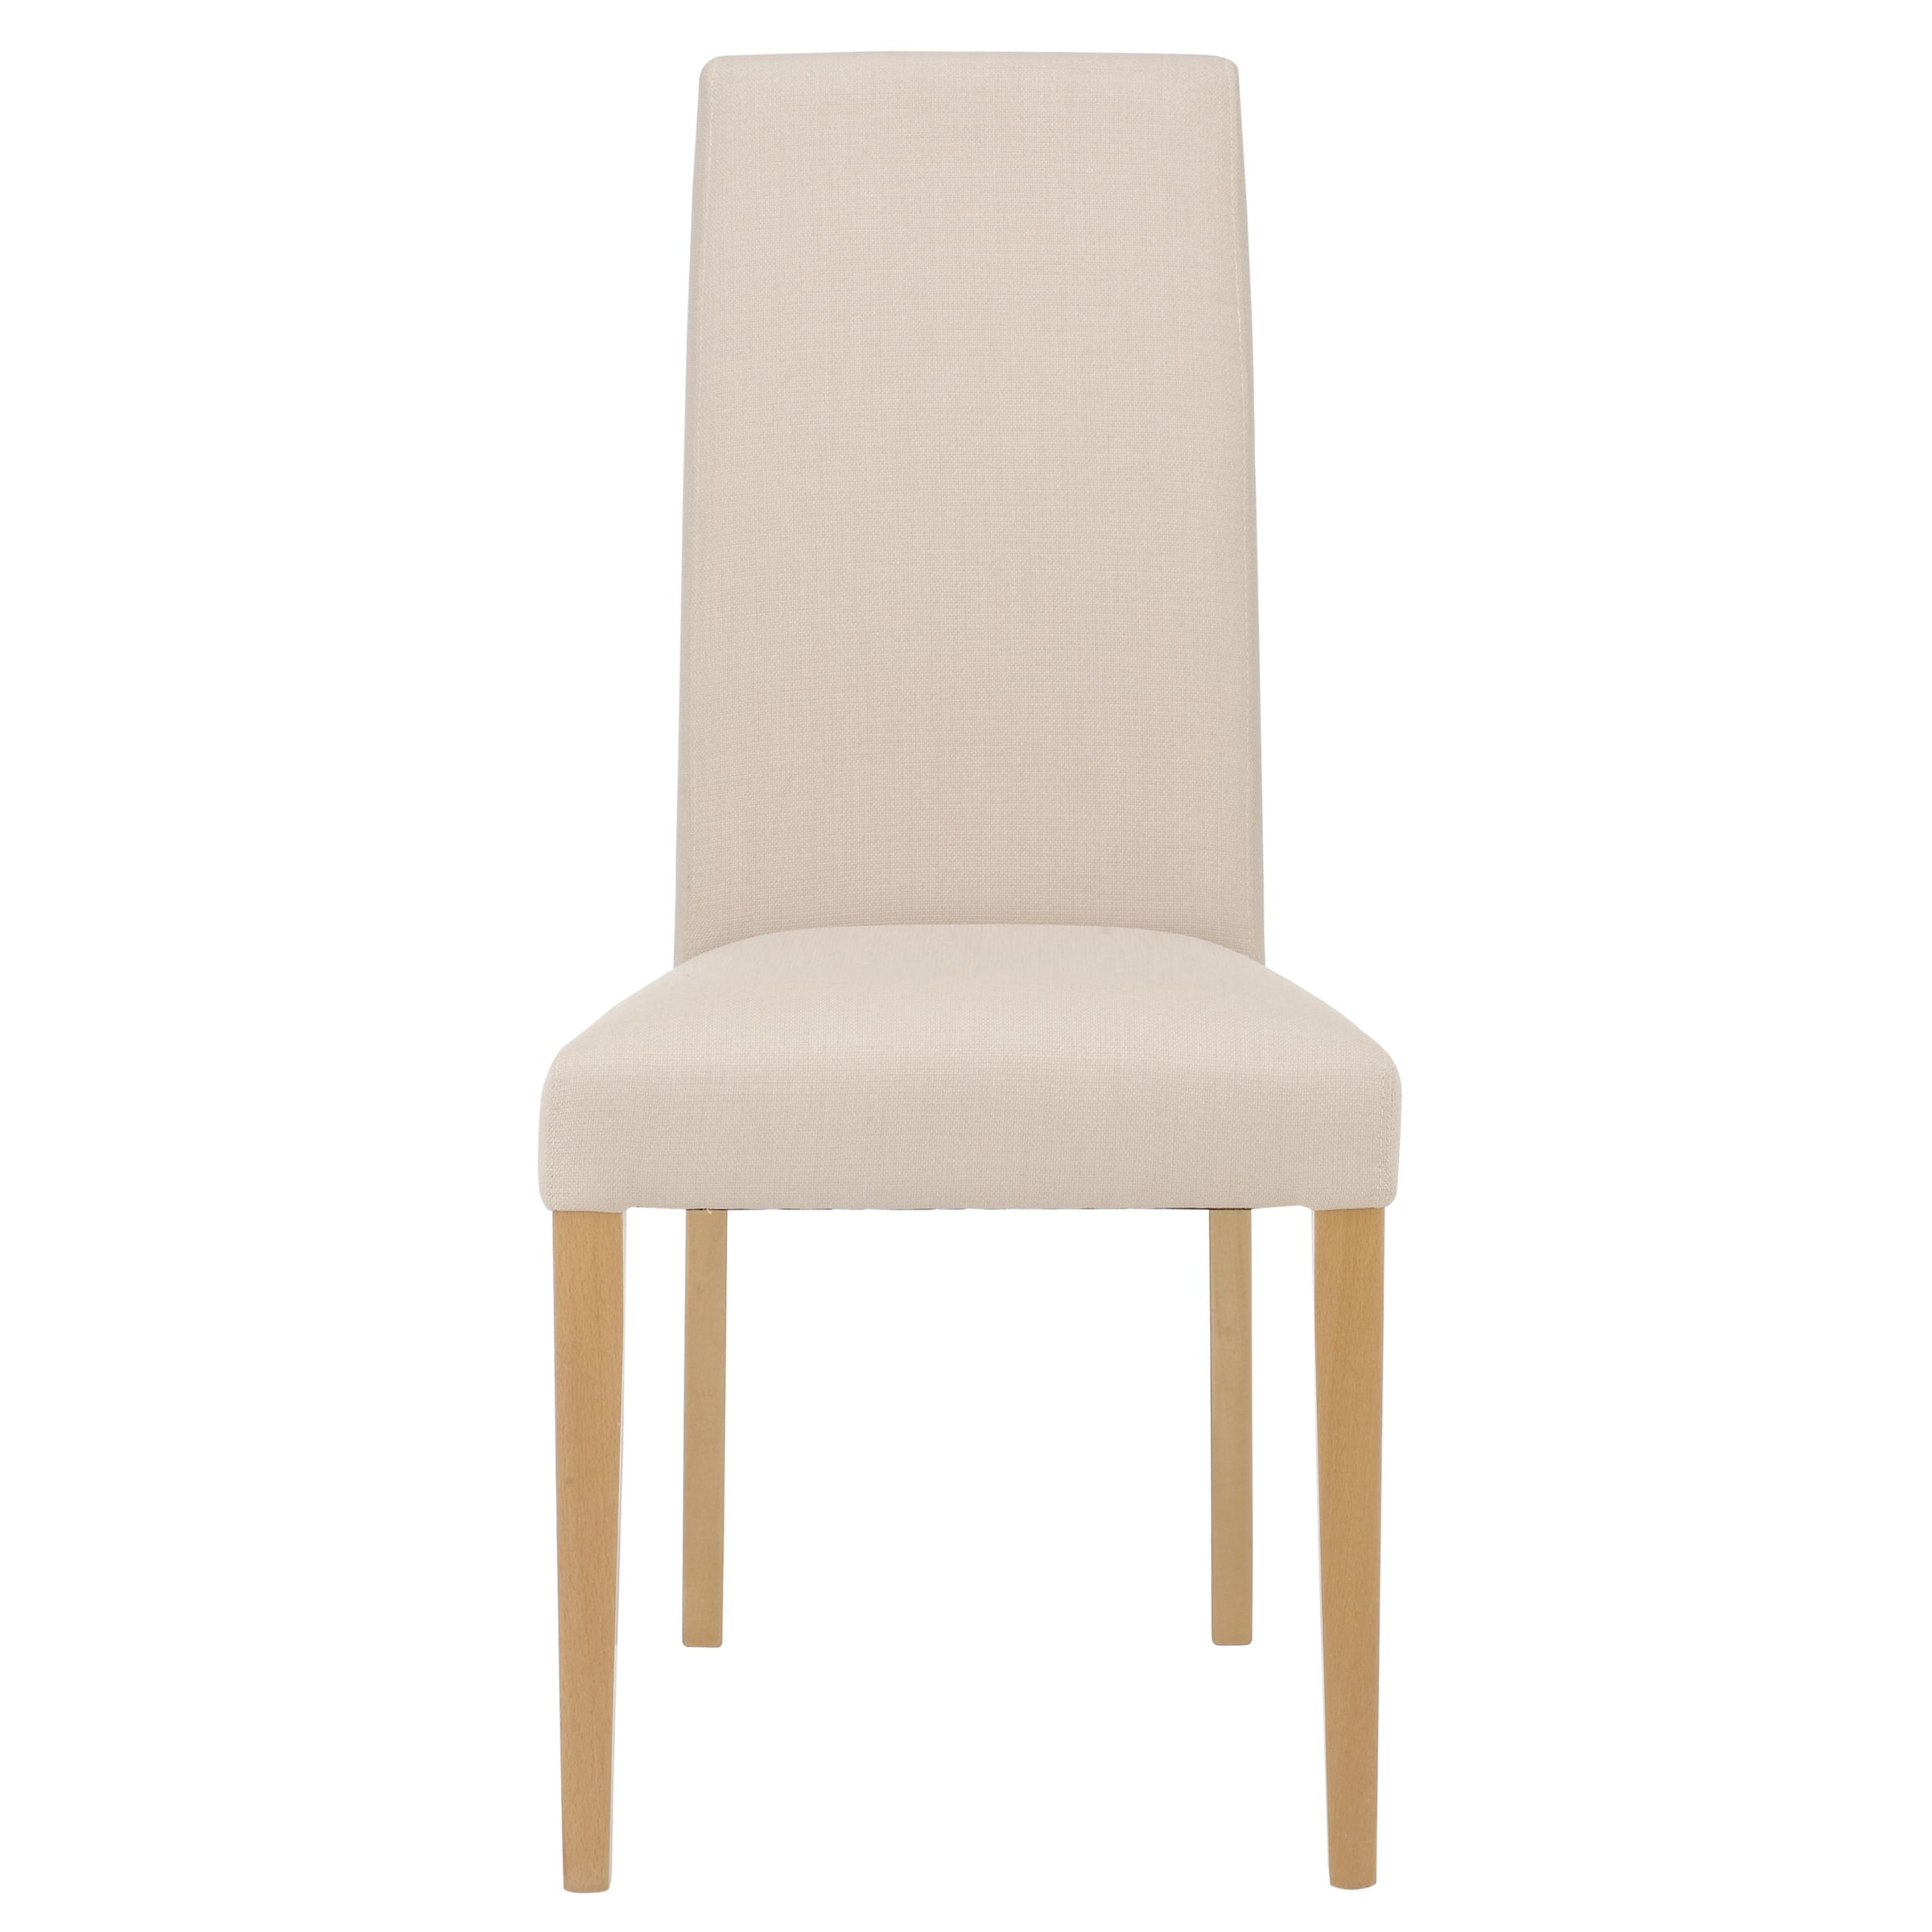 John Lewis Lydia Natural Fabric Dining Chair, Oak Stained